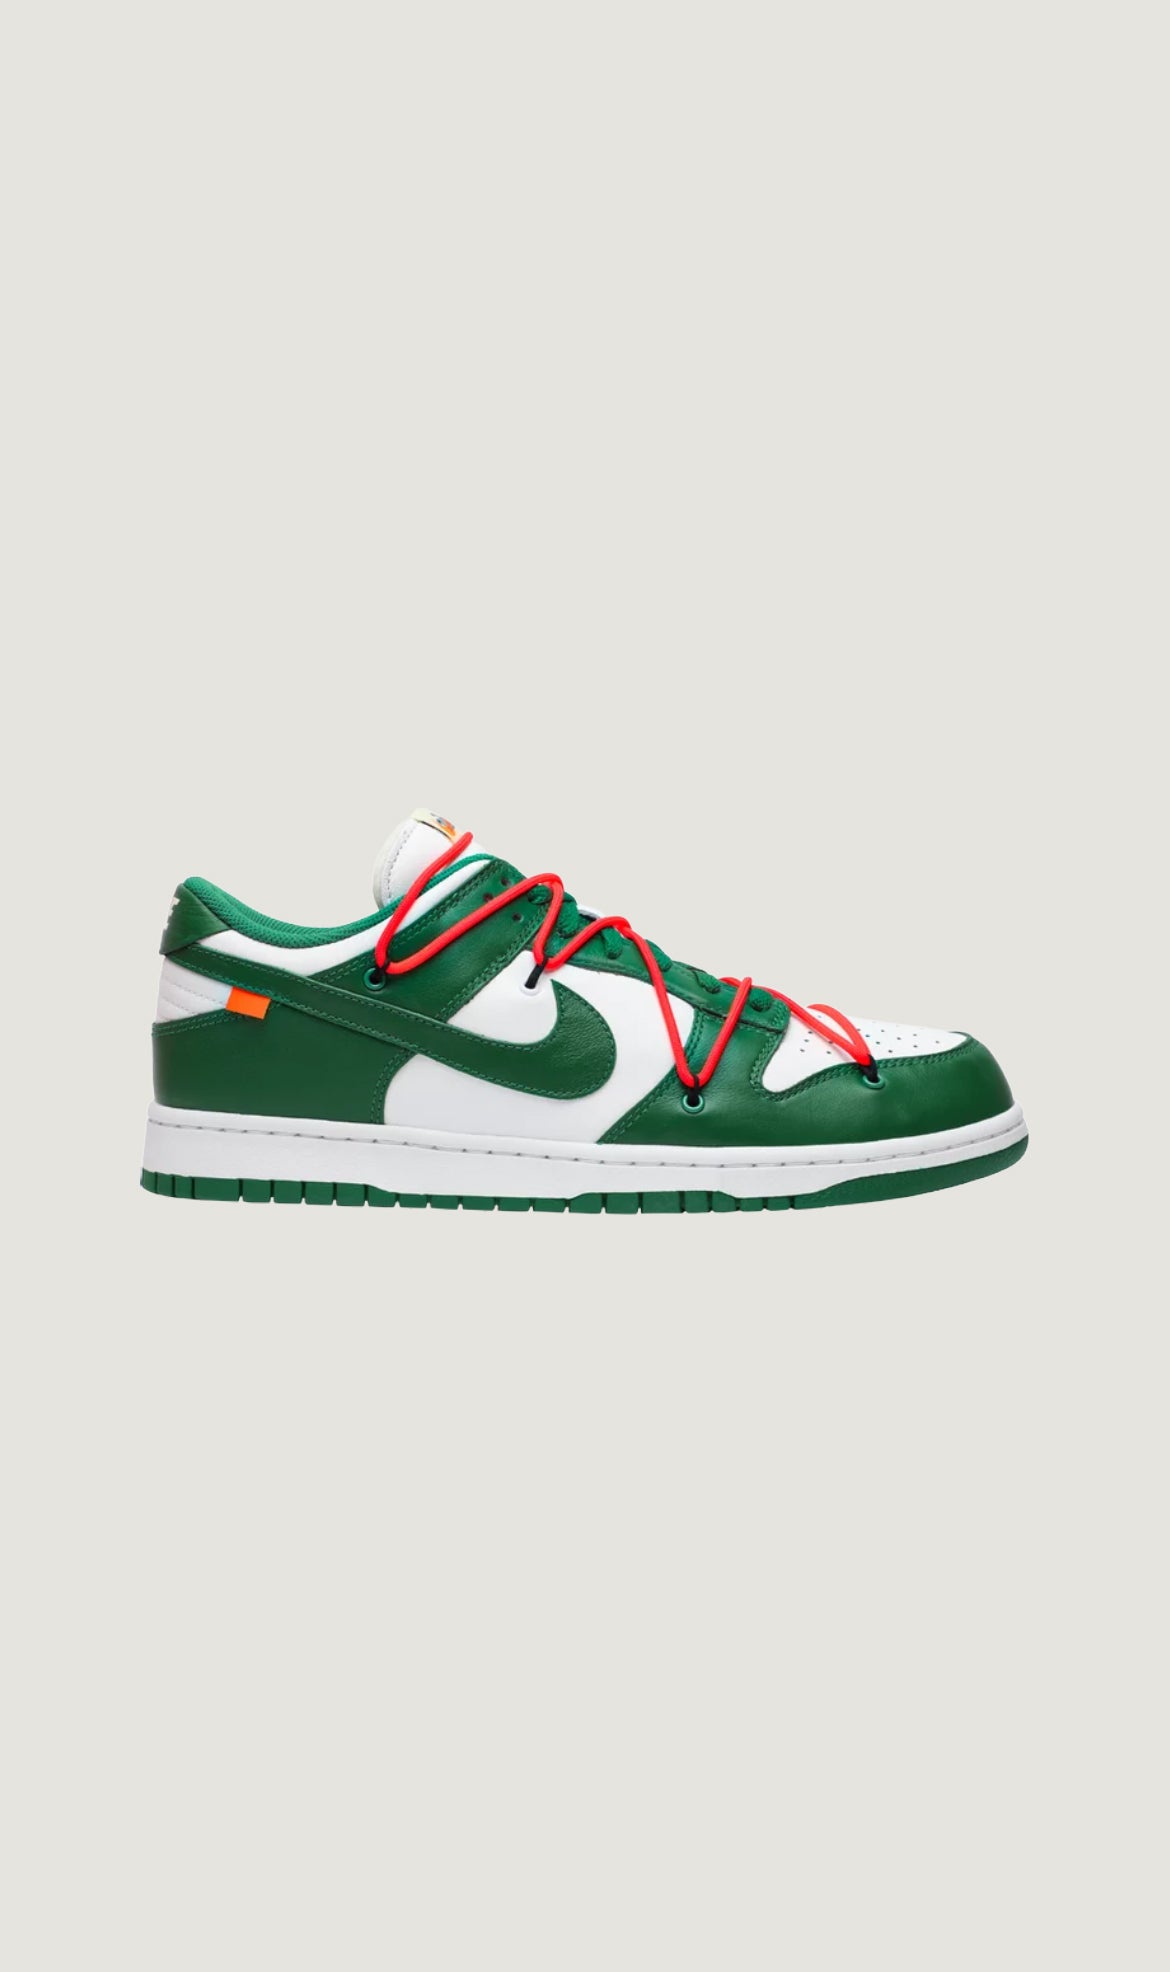 OFF-WHITE X DUNK LOW - PINE GREEN